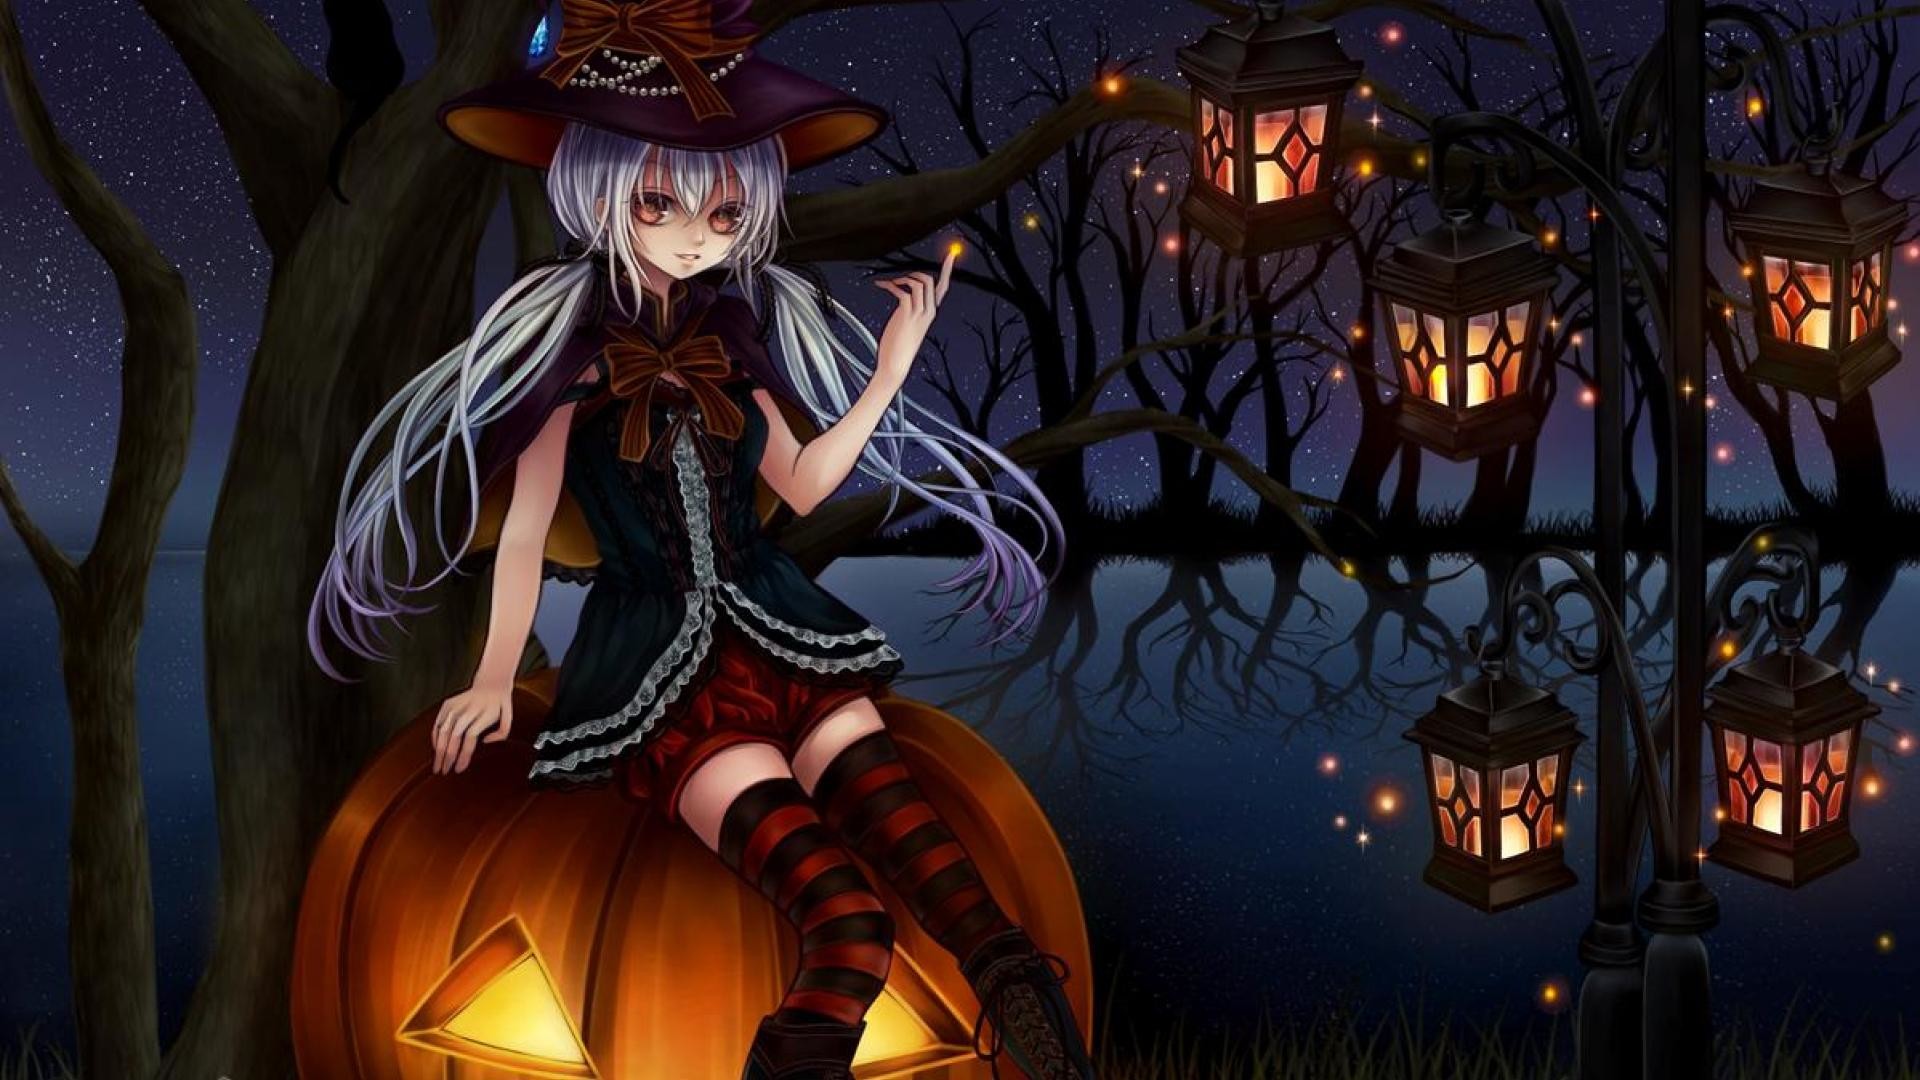 Free download Anime Halloween Wallpaper 54 images [1920x1080] for your